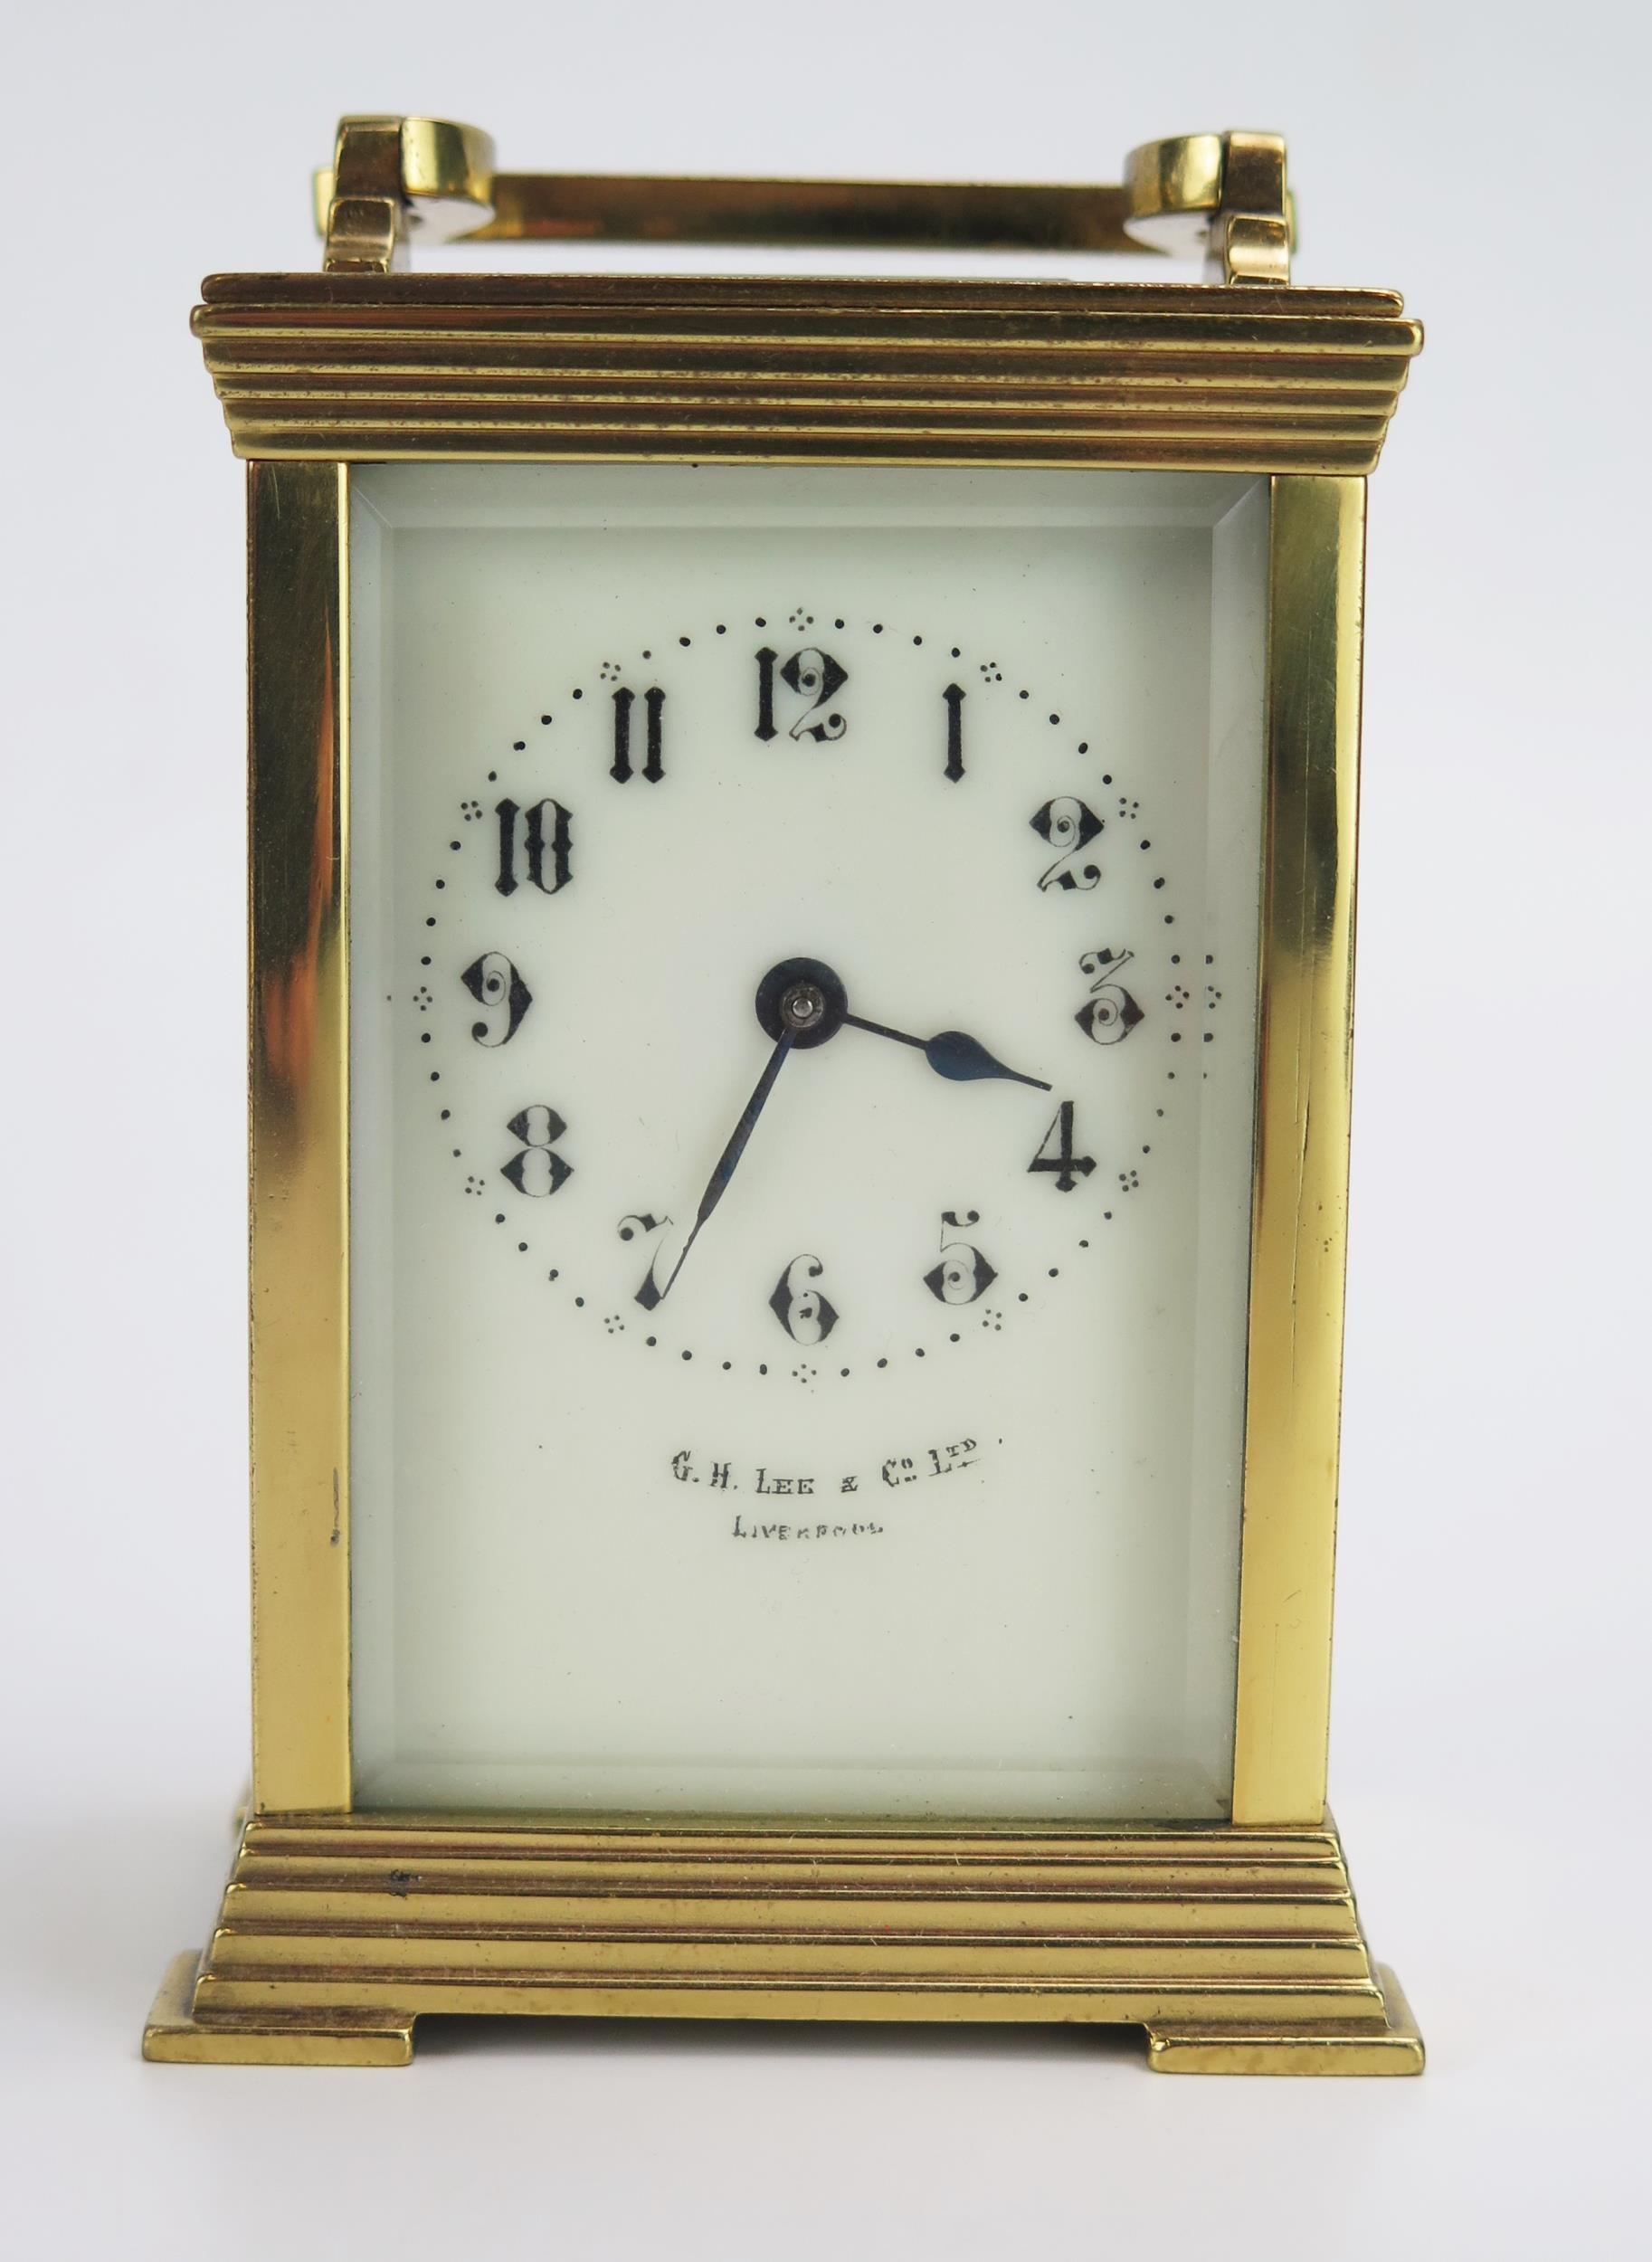 A lacquered brass carriage timepiece, with 6cm ivorine Arabic dial, the movement with lever platform